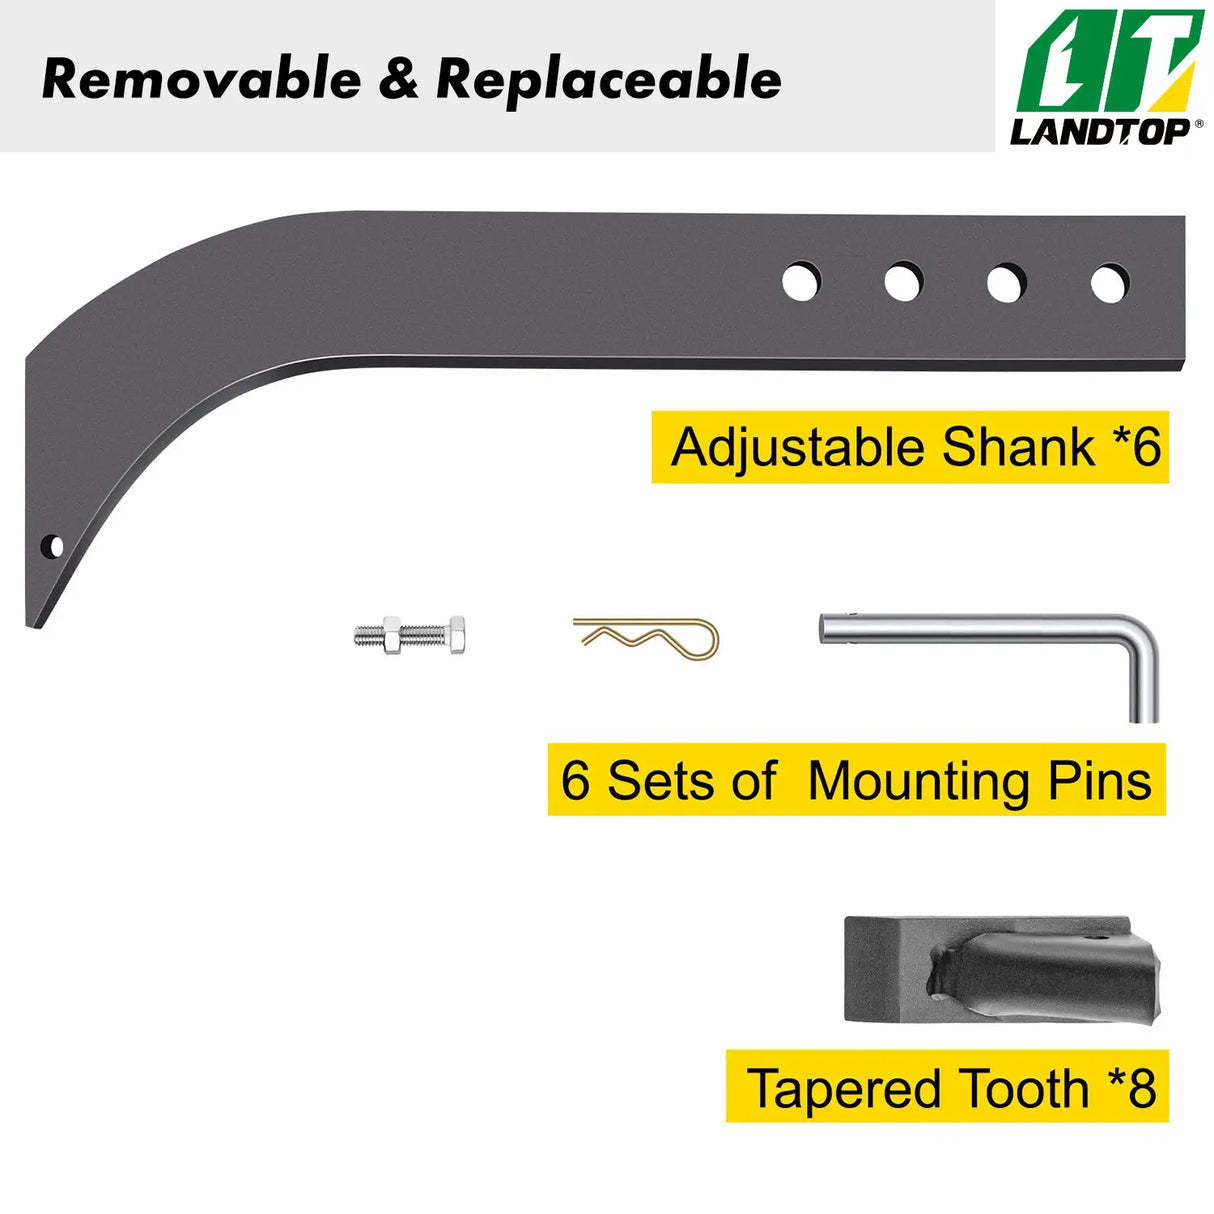 6pcs Box Blade Shank, 18" Scarifier Shank, 4 Holes Box Scraper Shank, Ripper Shank with Removable Tapered Teeth and Pins, Adjustable Shanks Assembly for Replacement, Digging, Plowing